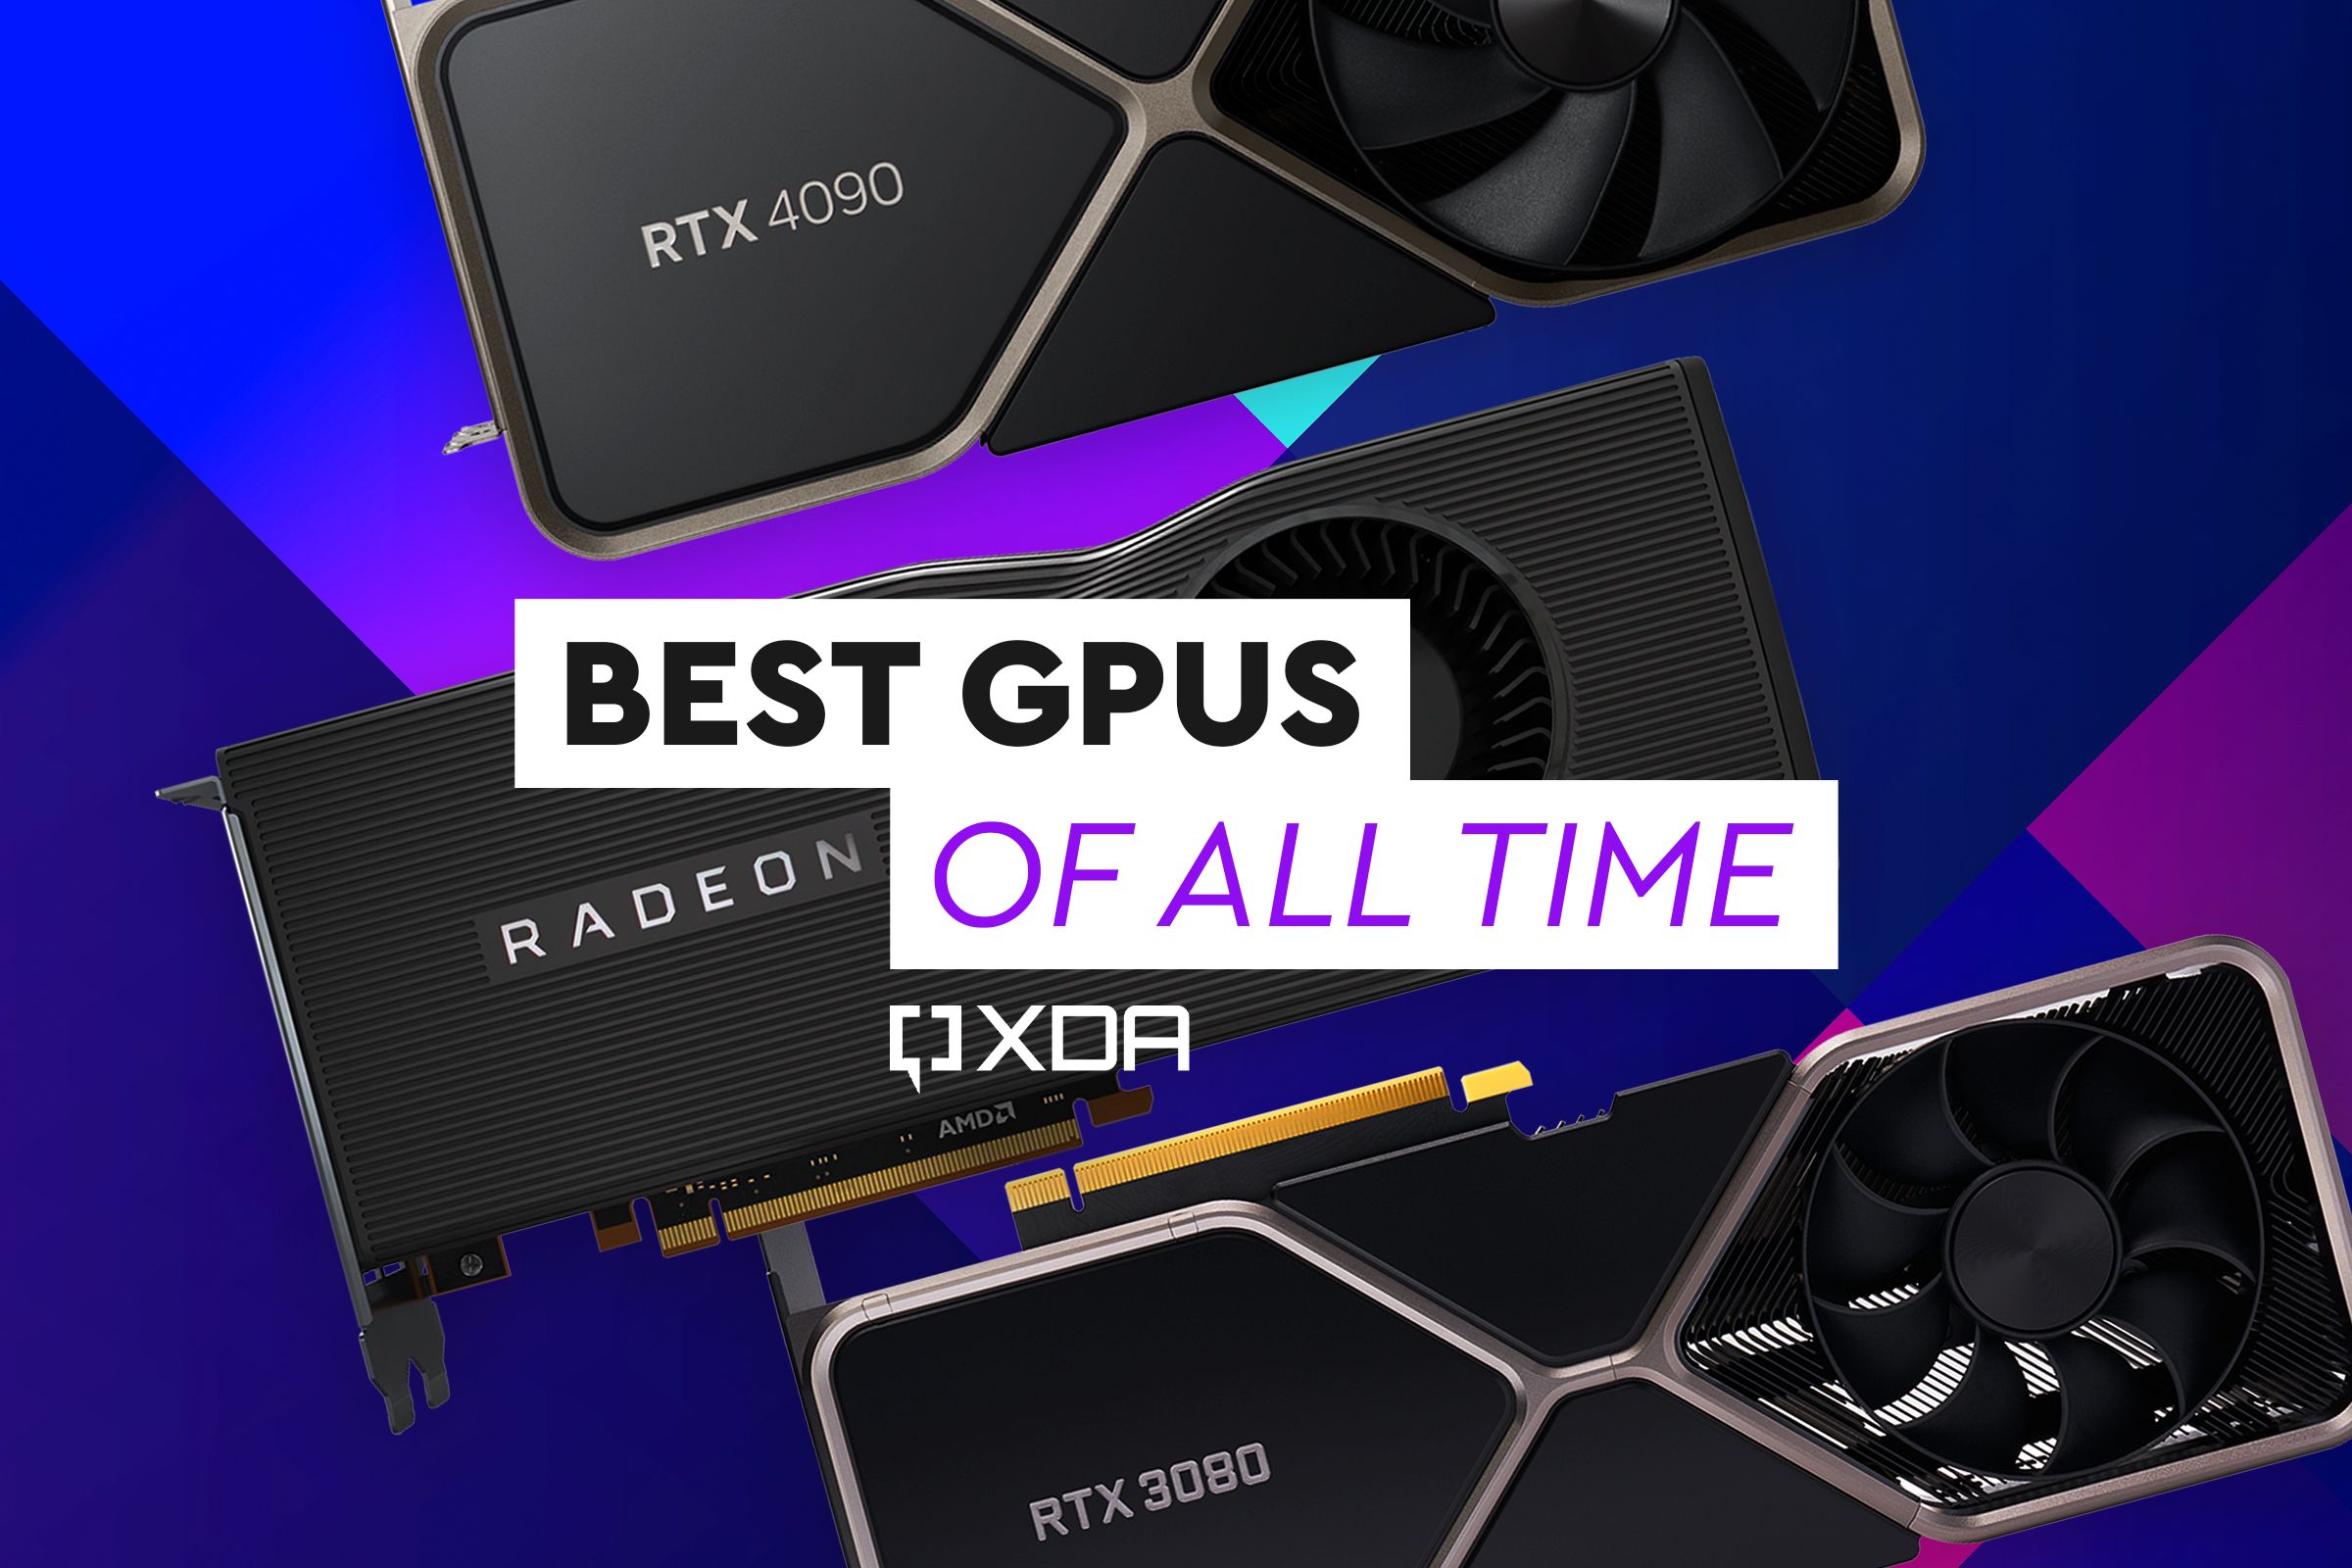 The 7 best GPUs of all time